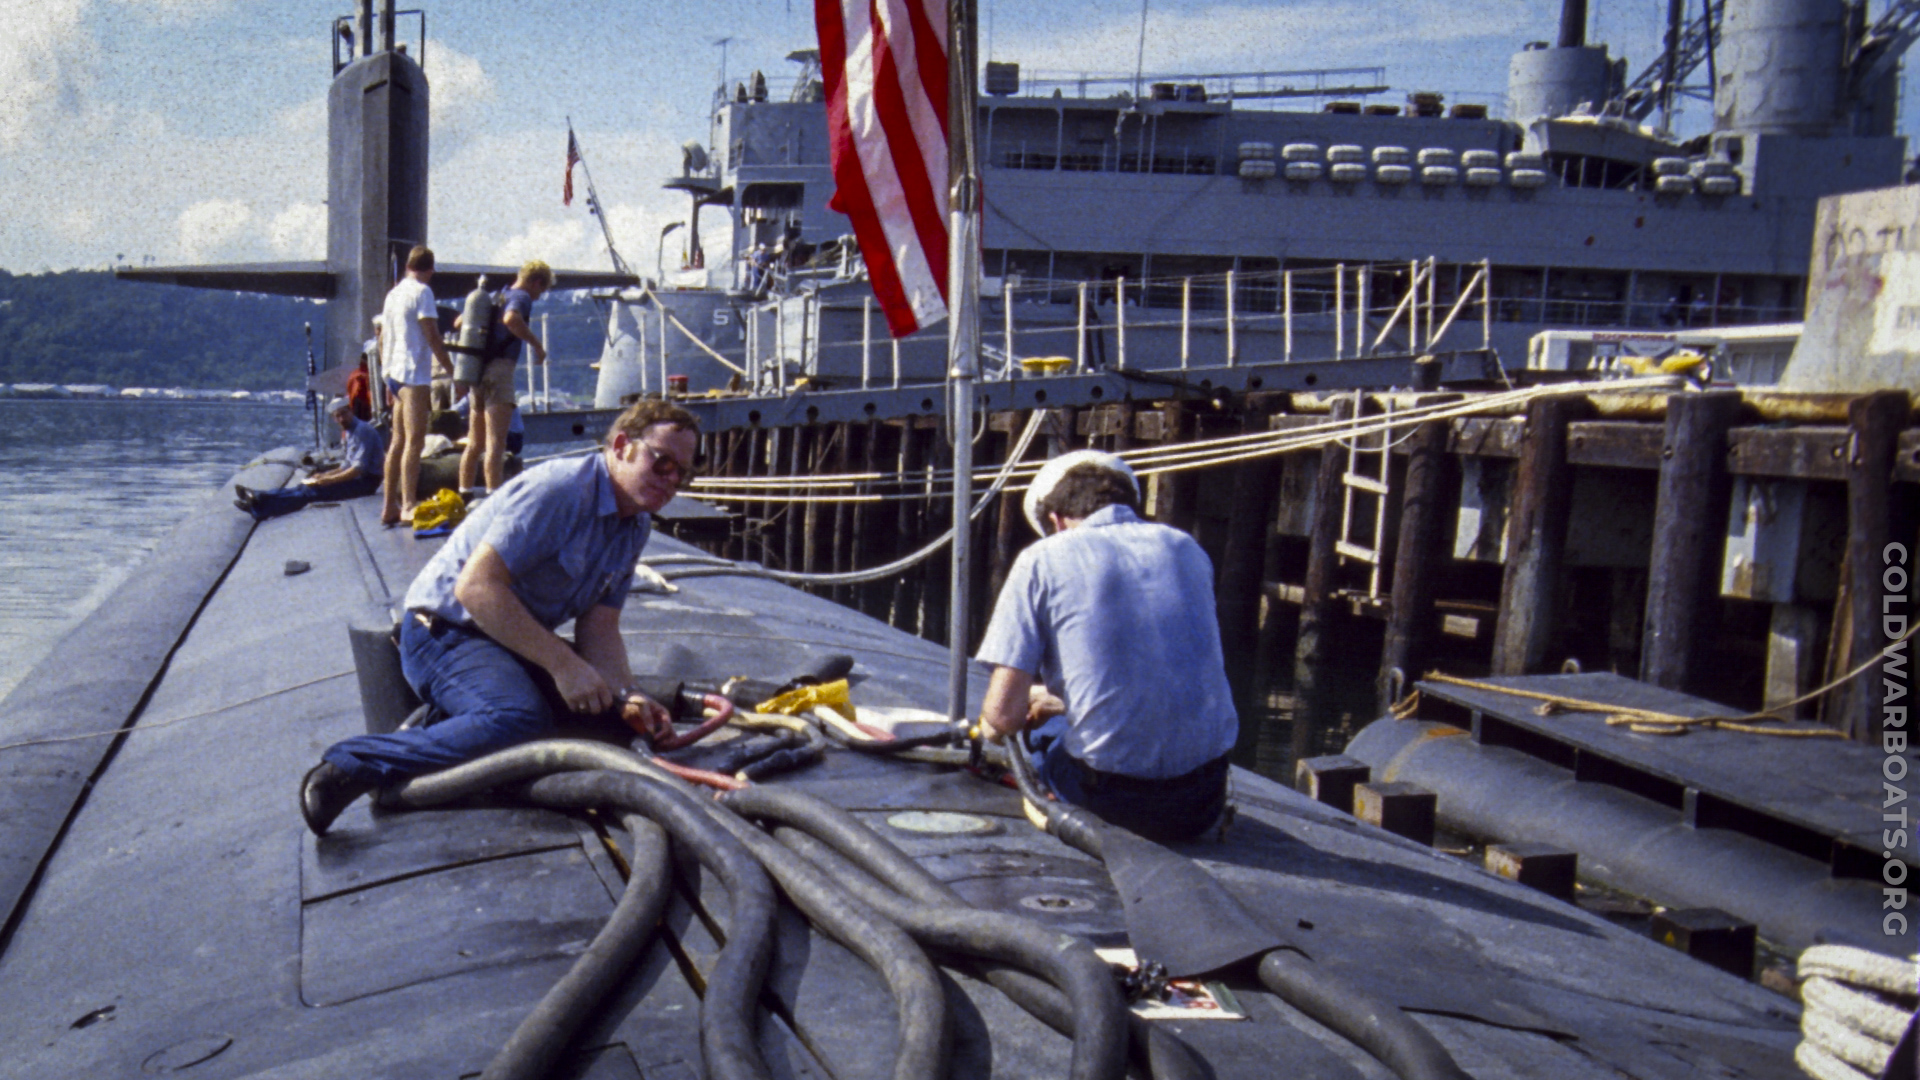 E Division unrigs shore power while divers prepare for a pre-underway hull inspection on the USS WILLIAM H. BATES (SSN 680), Subic Bay, PI - 1984